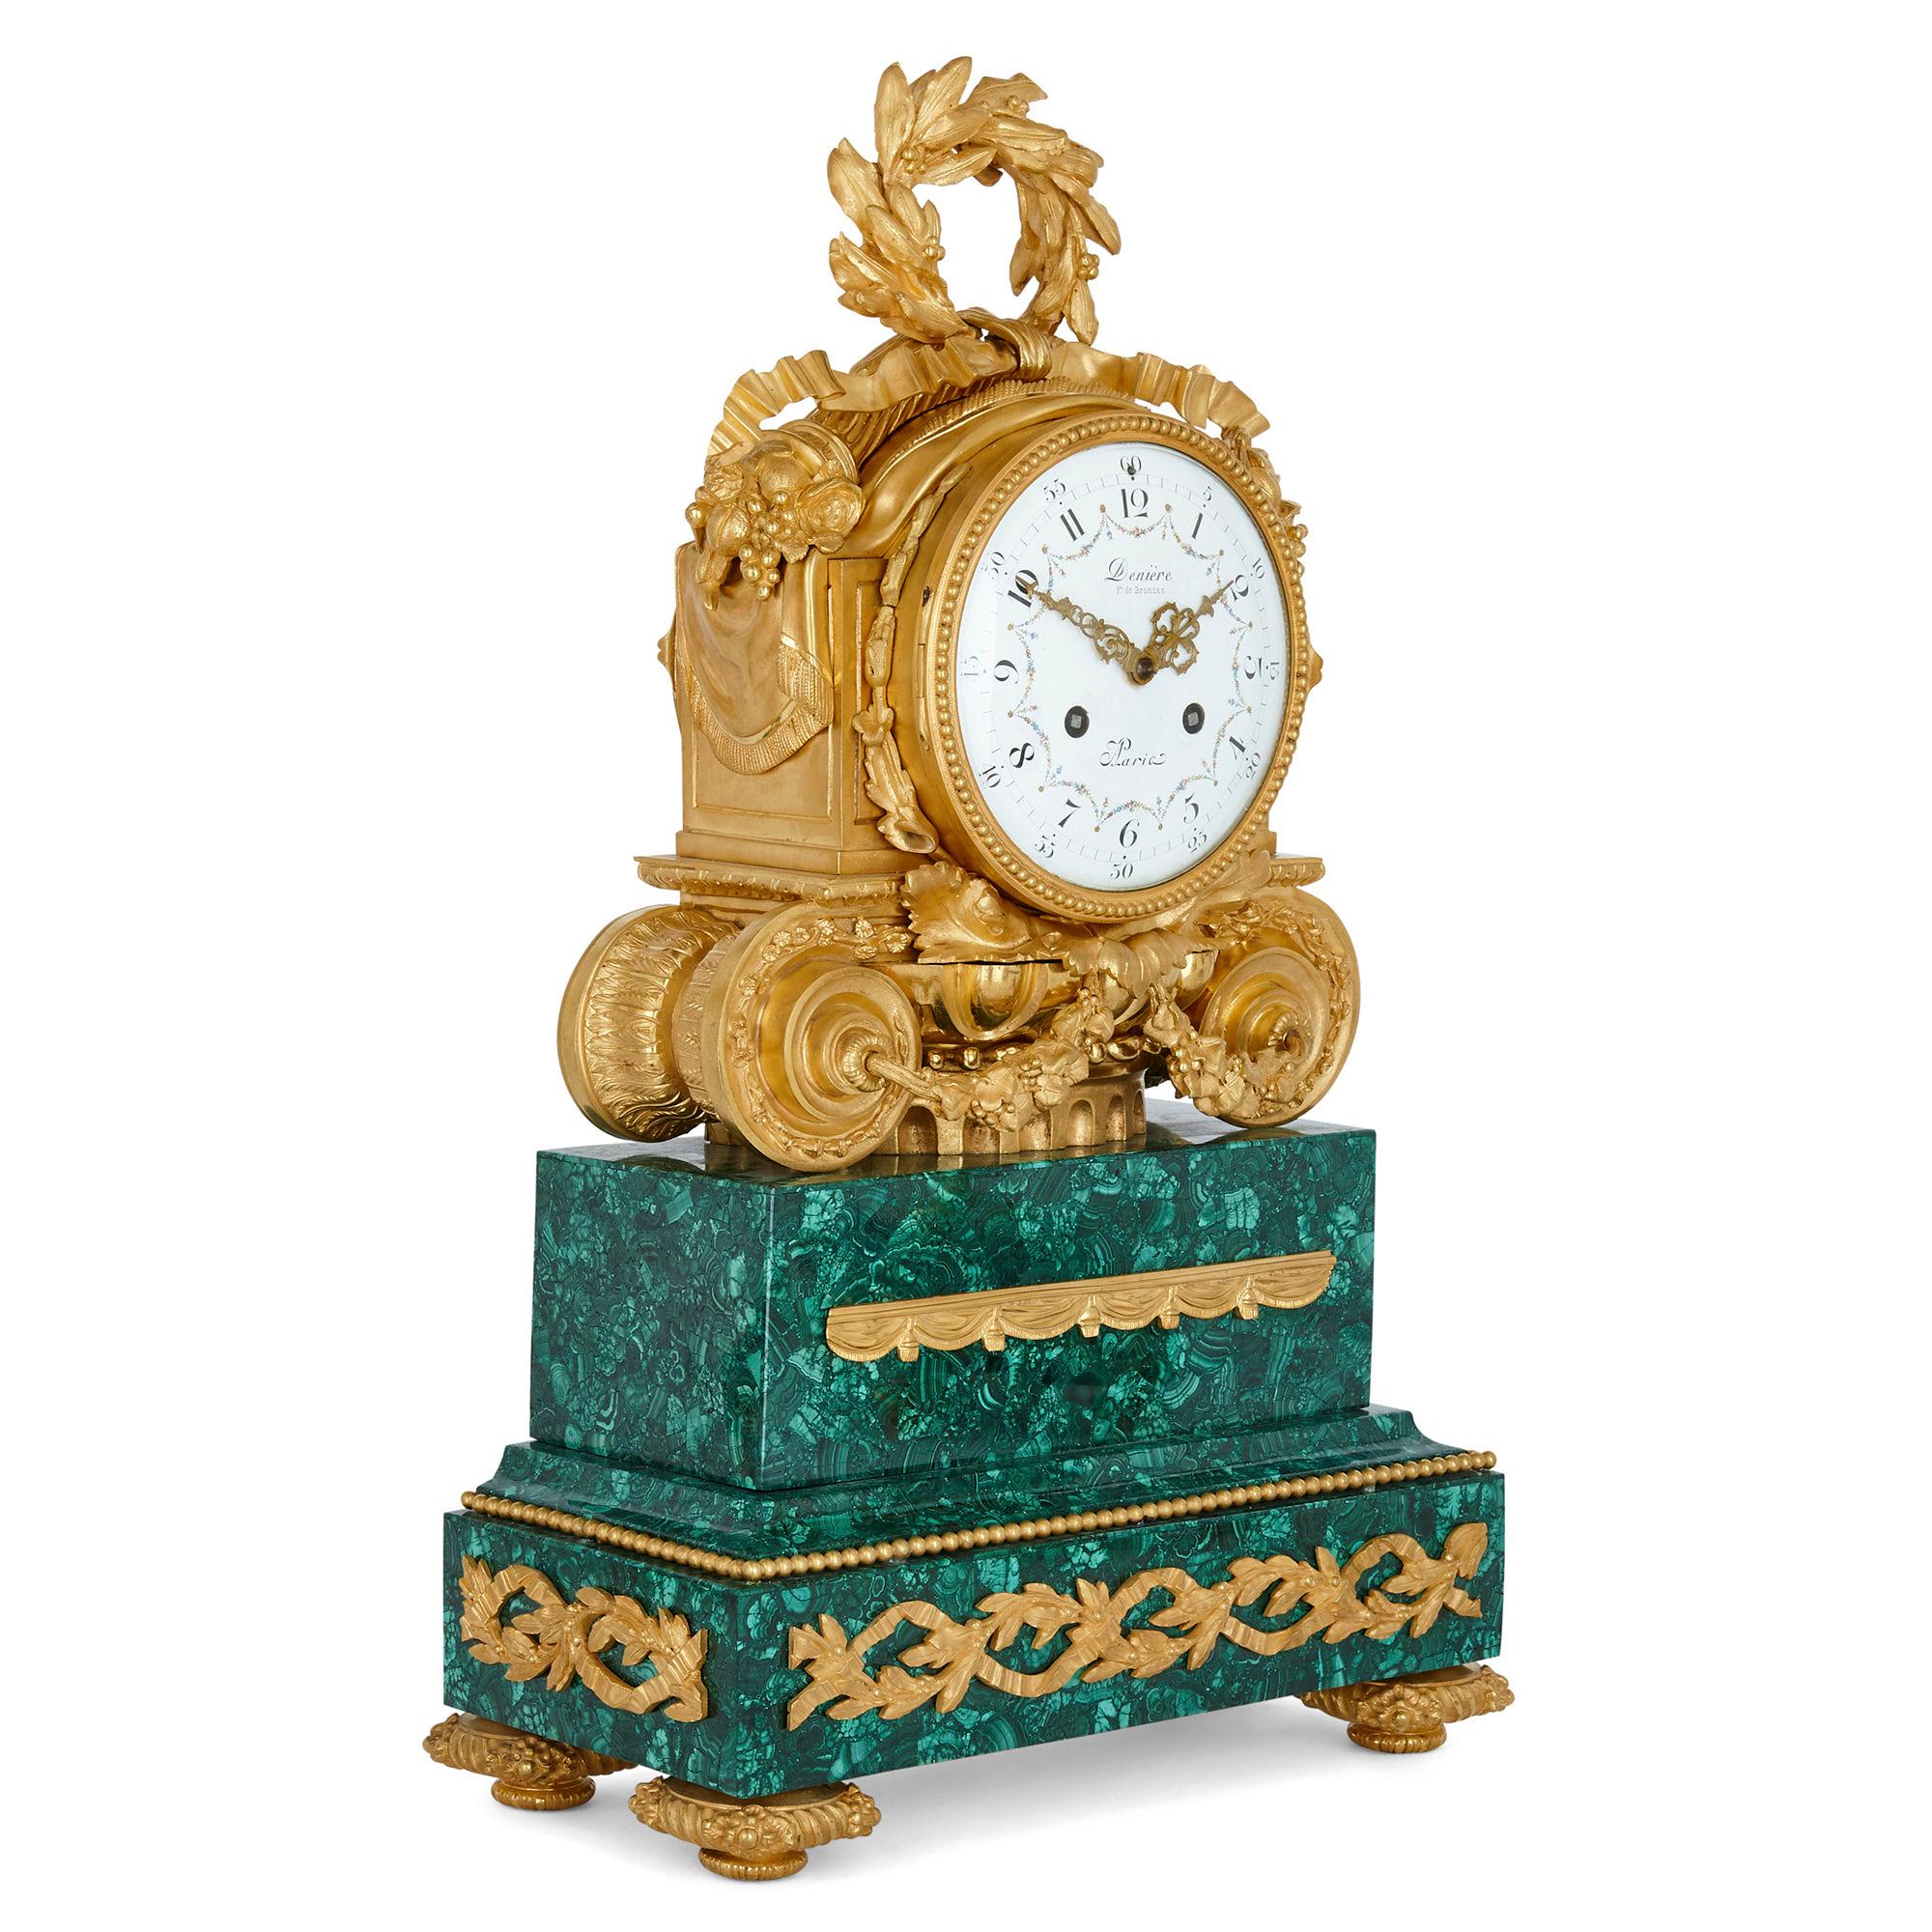 Antique Parisian mantel clock and candelabra set by Denière et Fils
French, 19th century
Clock: Height 60cm, width 36cm, depth 19cm
Candelabra: Height 60cm, diameter 30cm

This beautiful clock set is crafted from ormolu and a later malachite